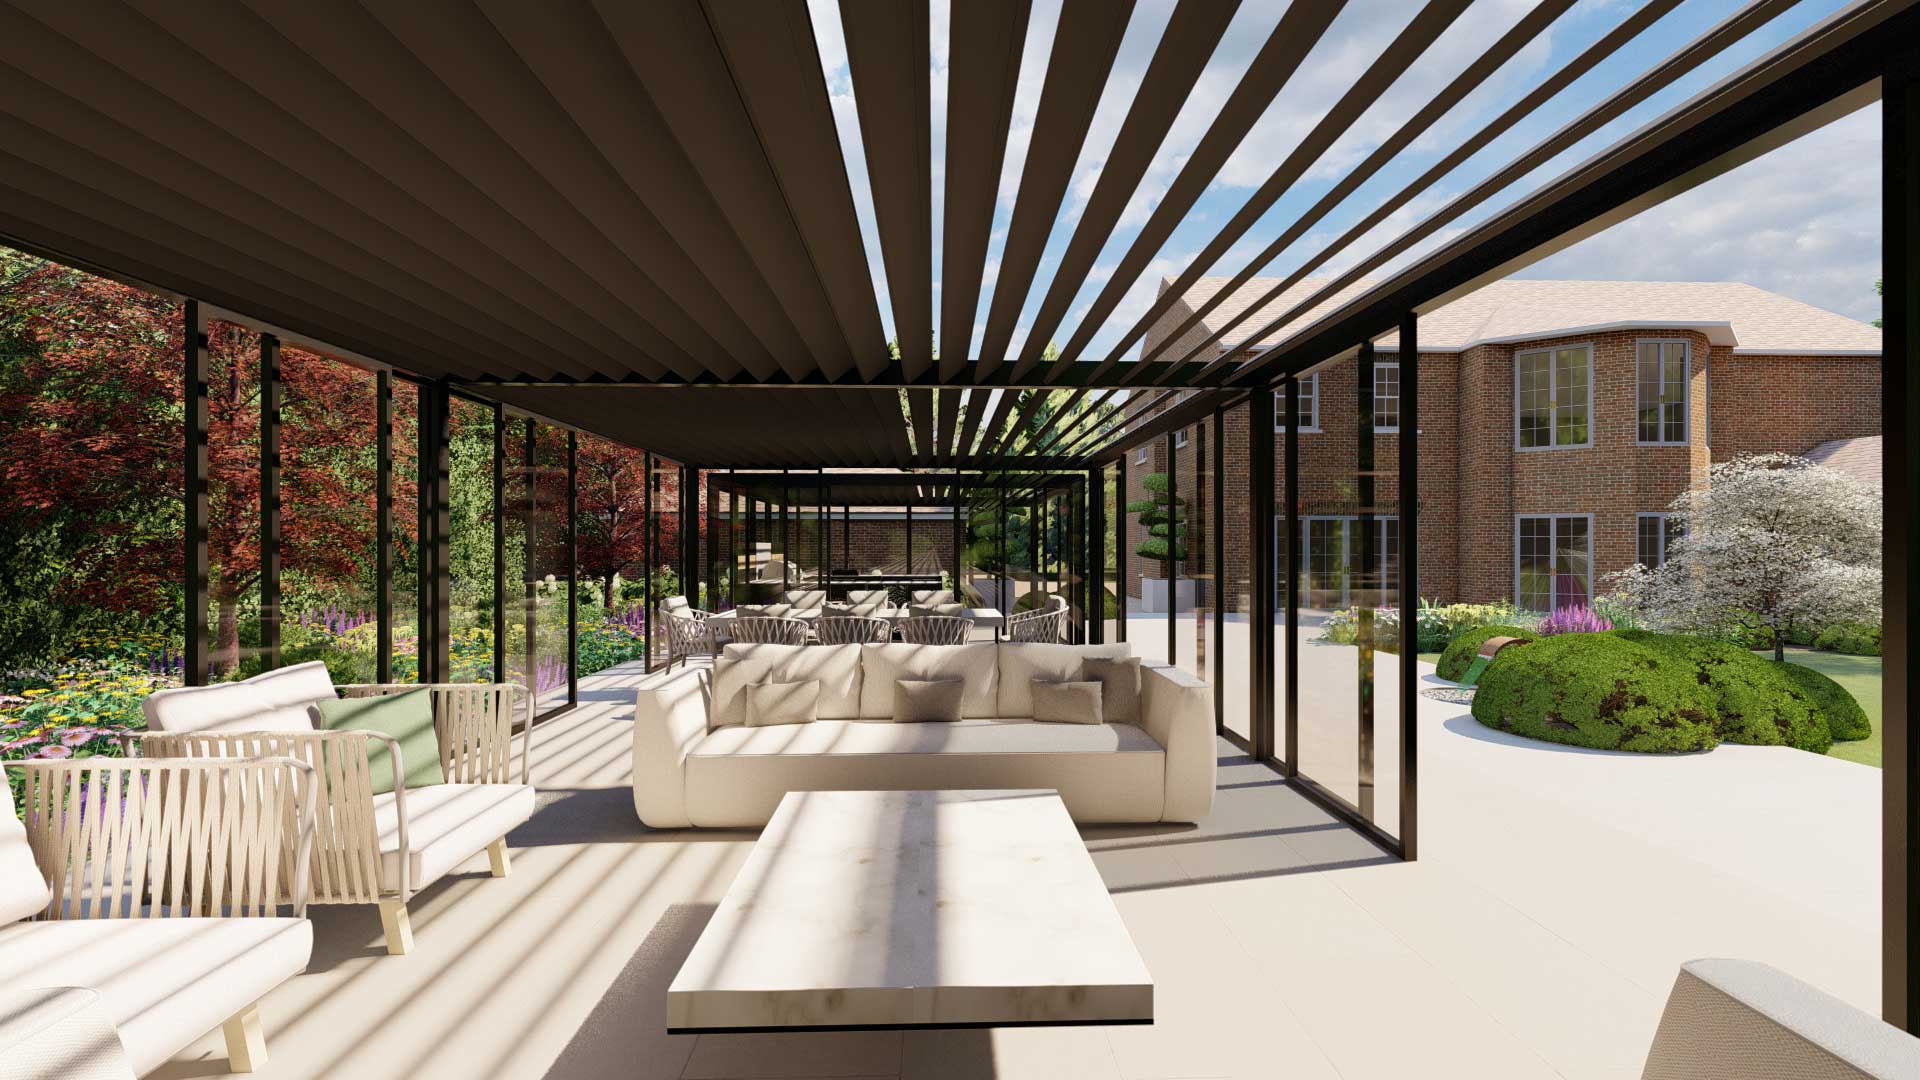 Inside, an aluminium garden pergola showing the roof and a large garden dining area